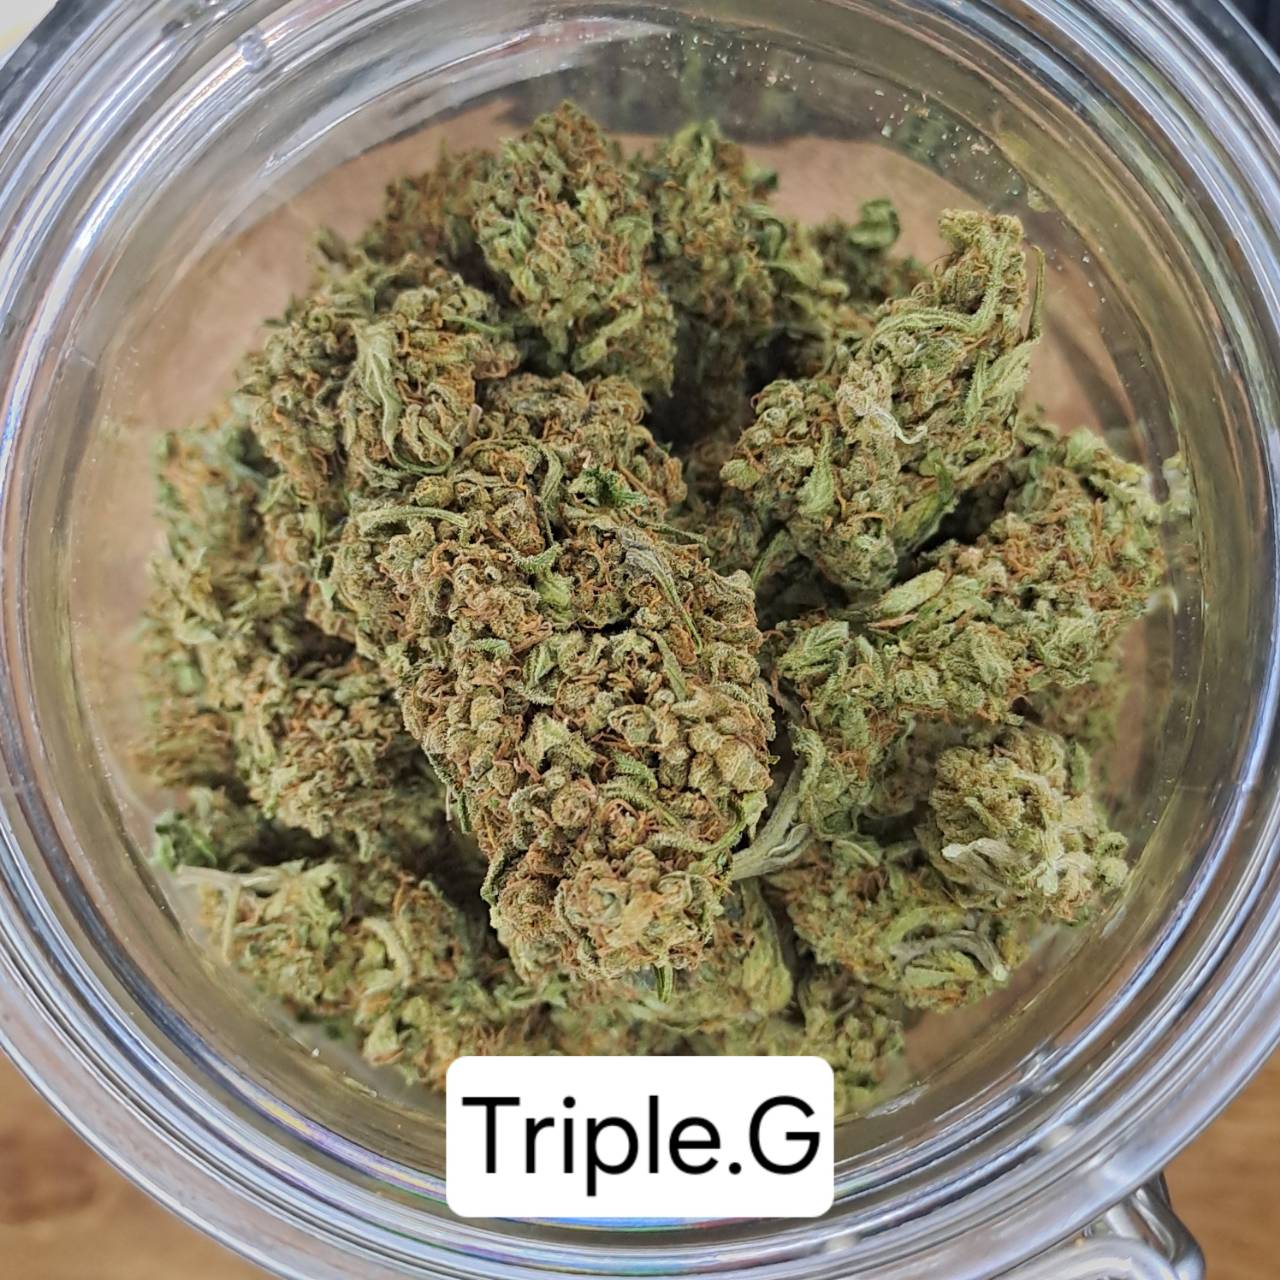 Product Image for Triple G